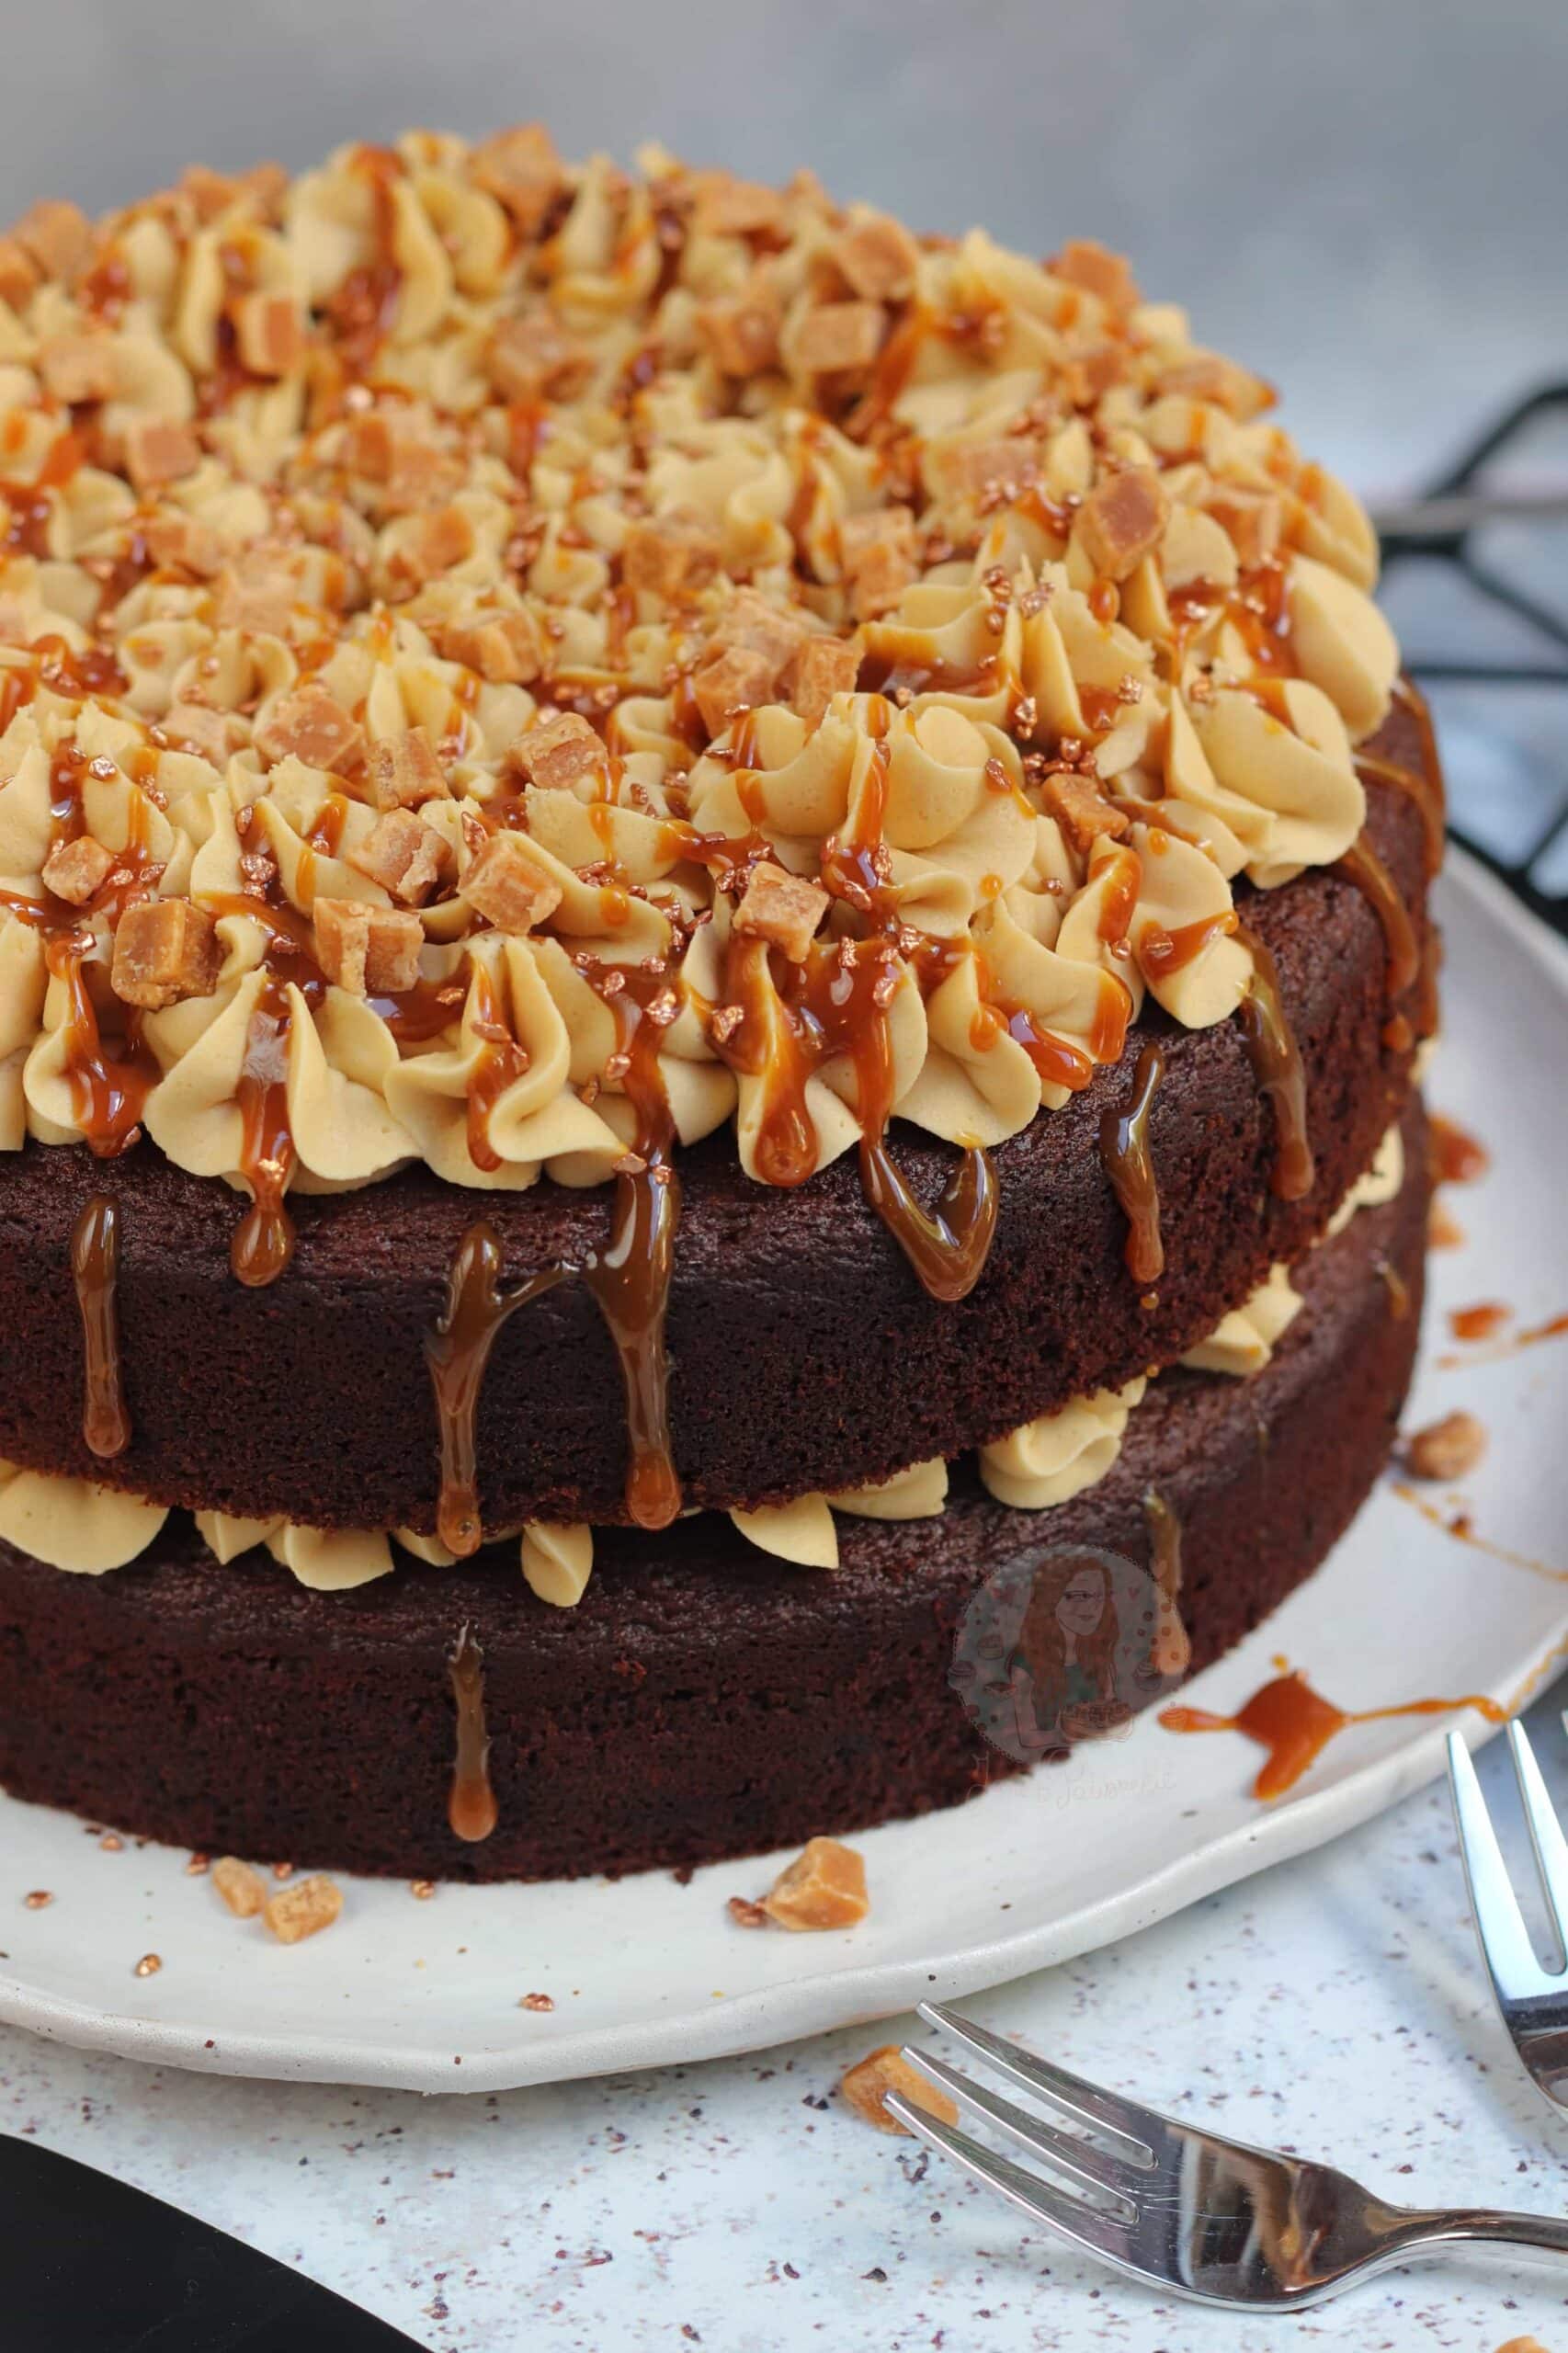 Sticky Toffee Cake! - Jane's Patisserie